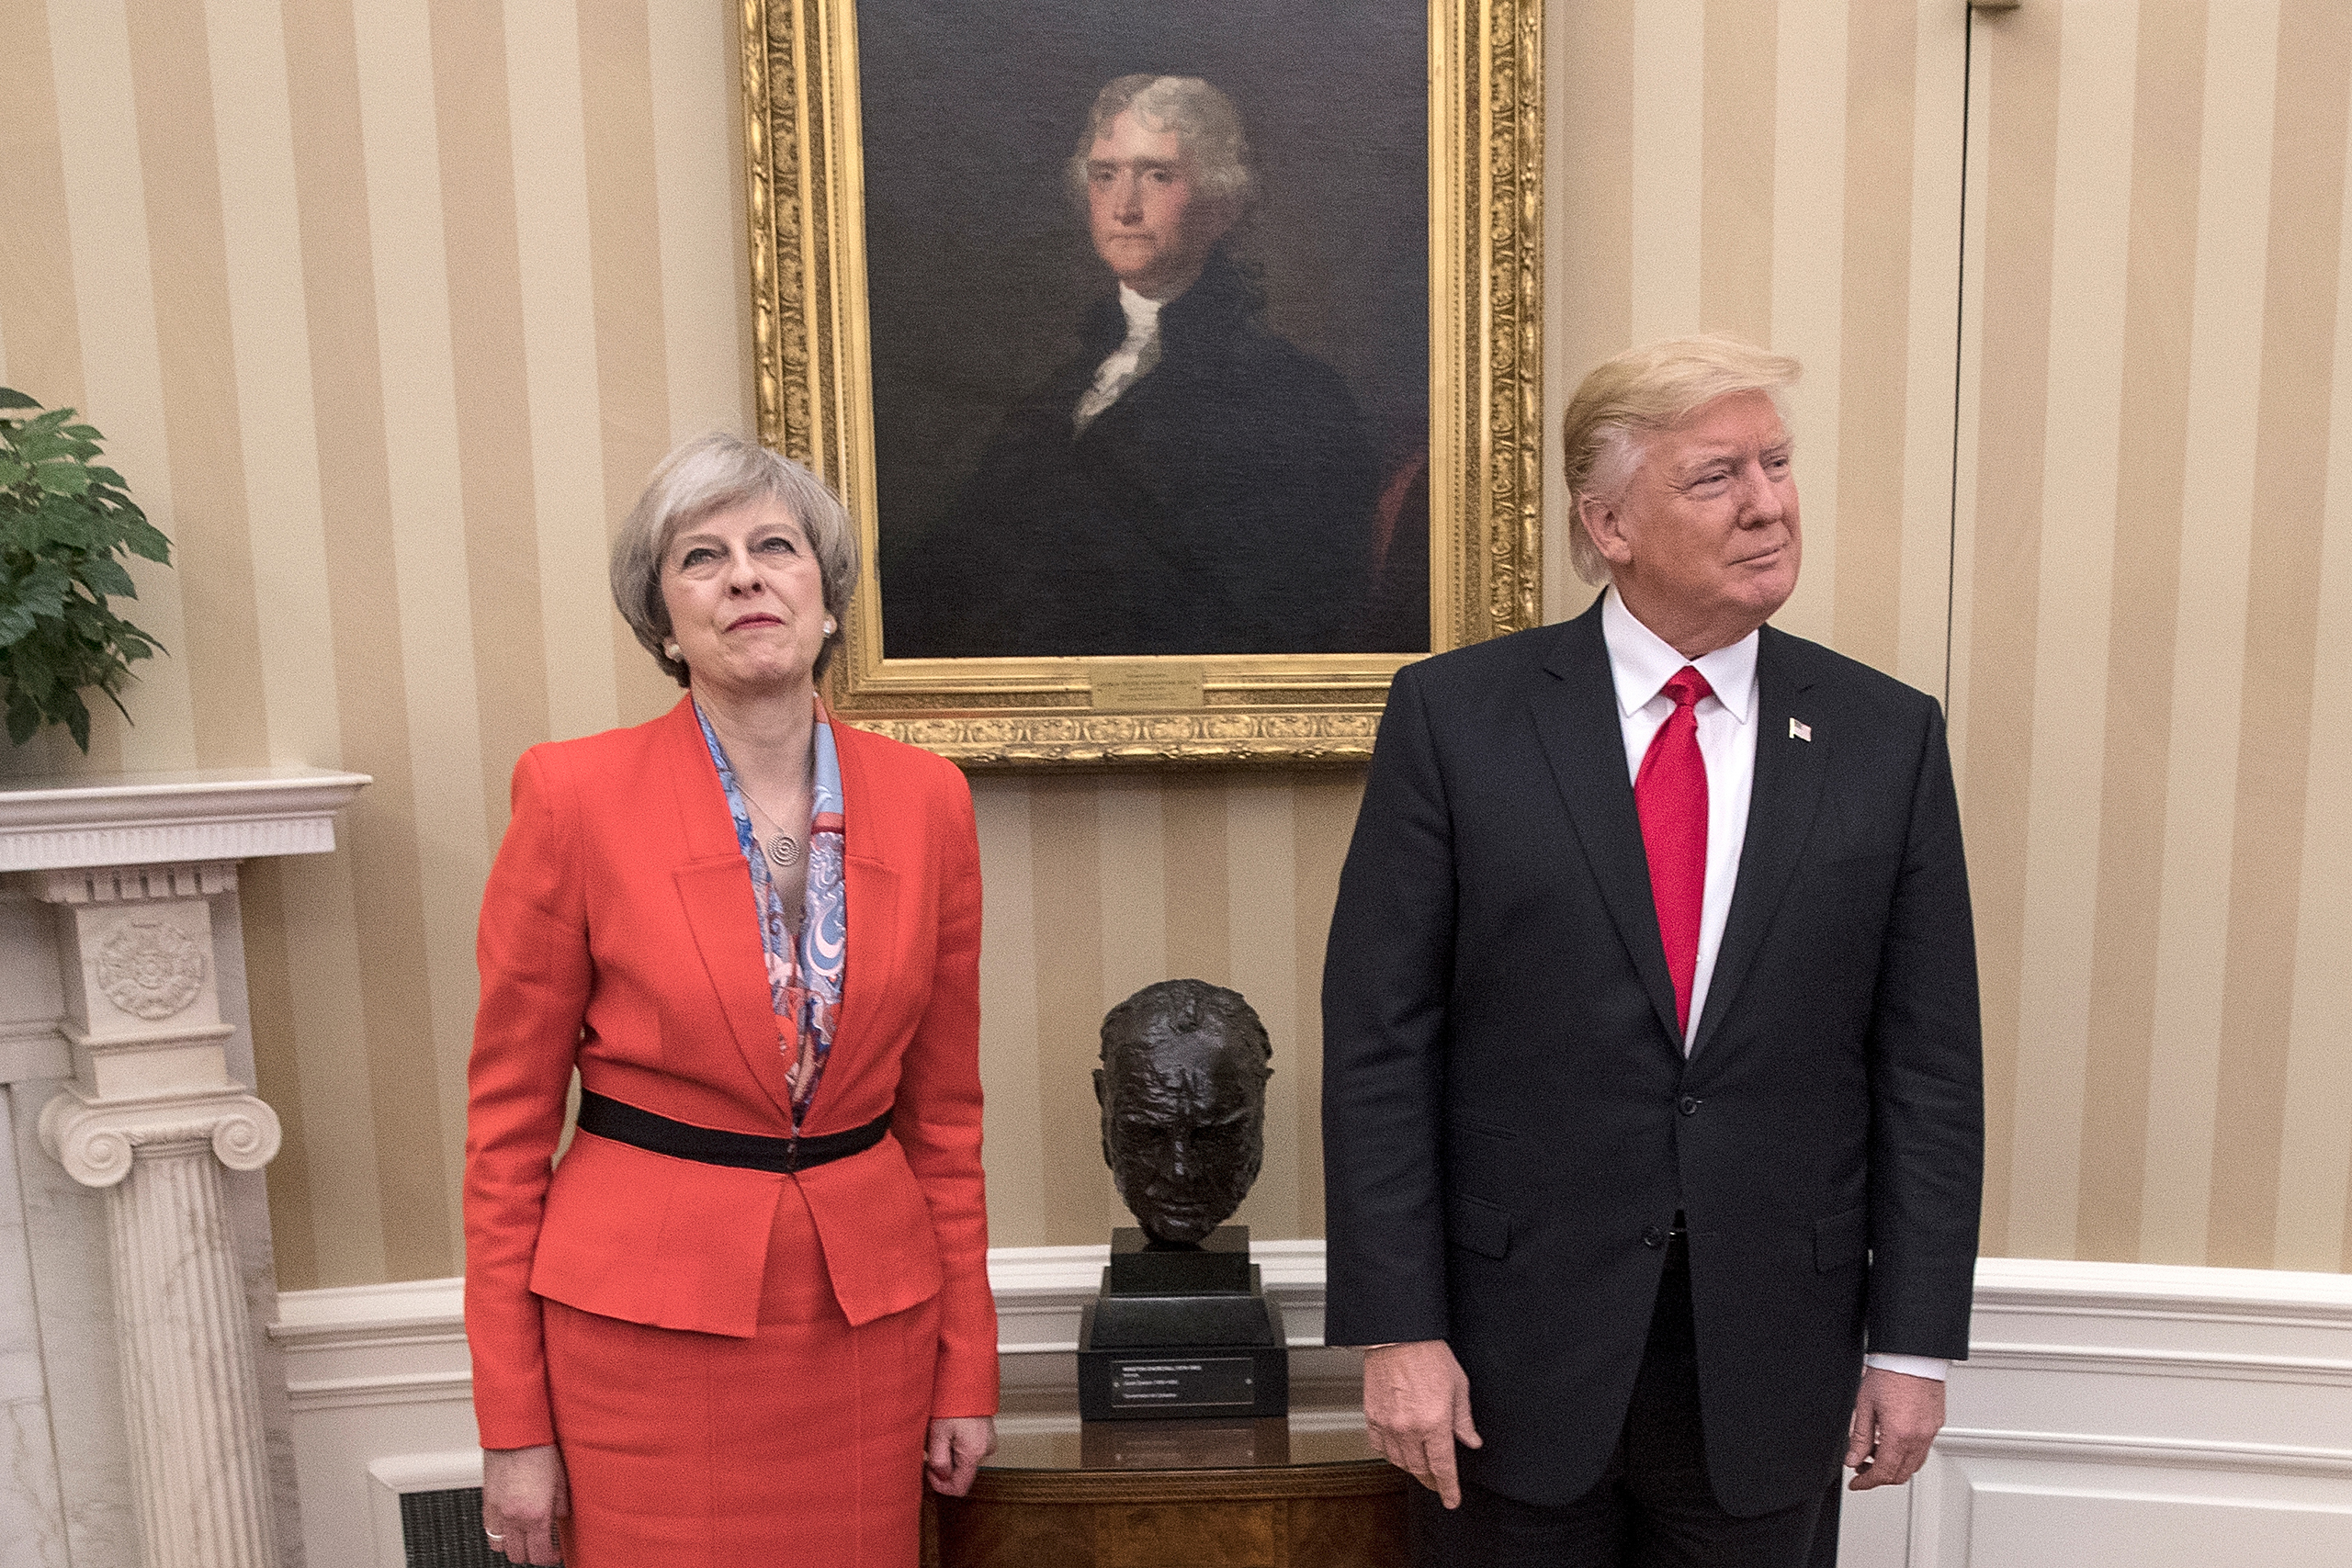 British Prime Minister Theresa May with President Donald Trump in The Oval Office at The White House, on Jan. 27, 2017.